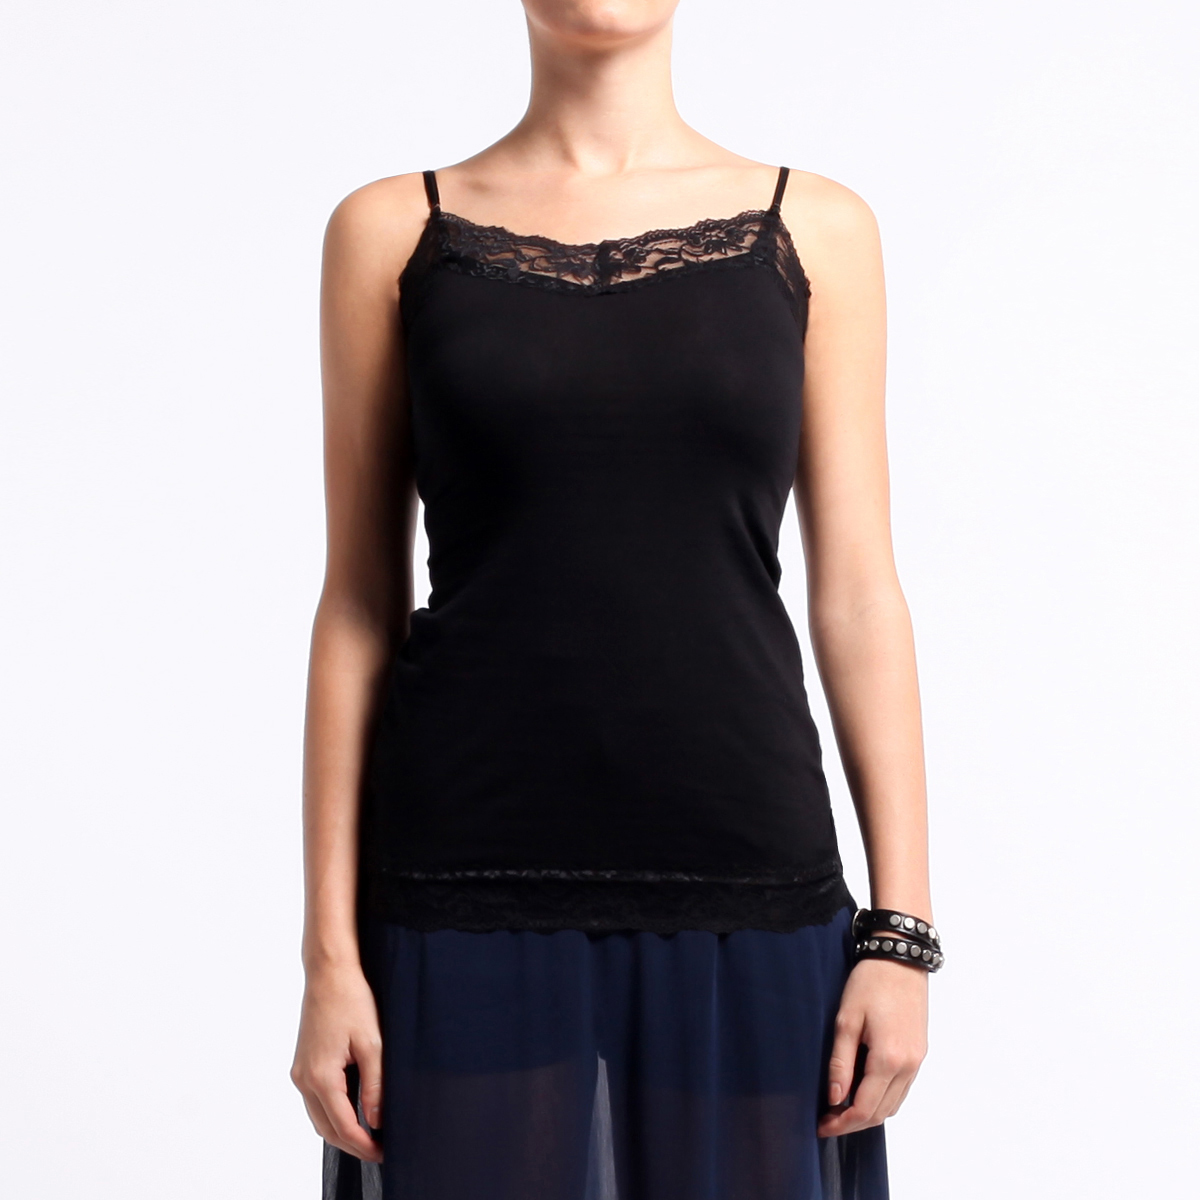 Black Lace Camisole by Bozzolo